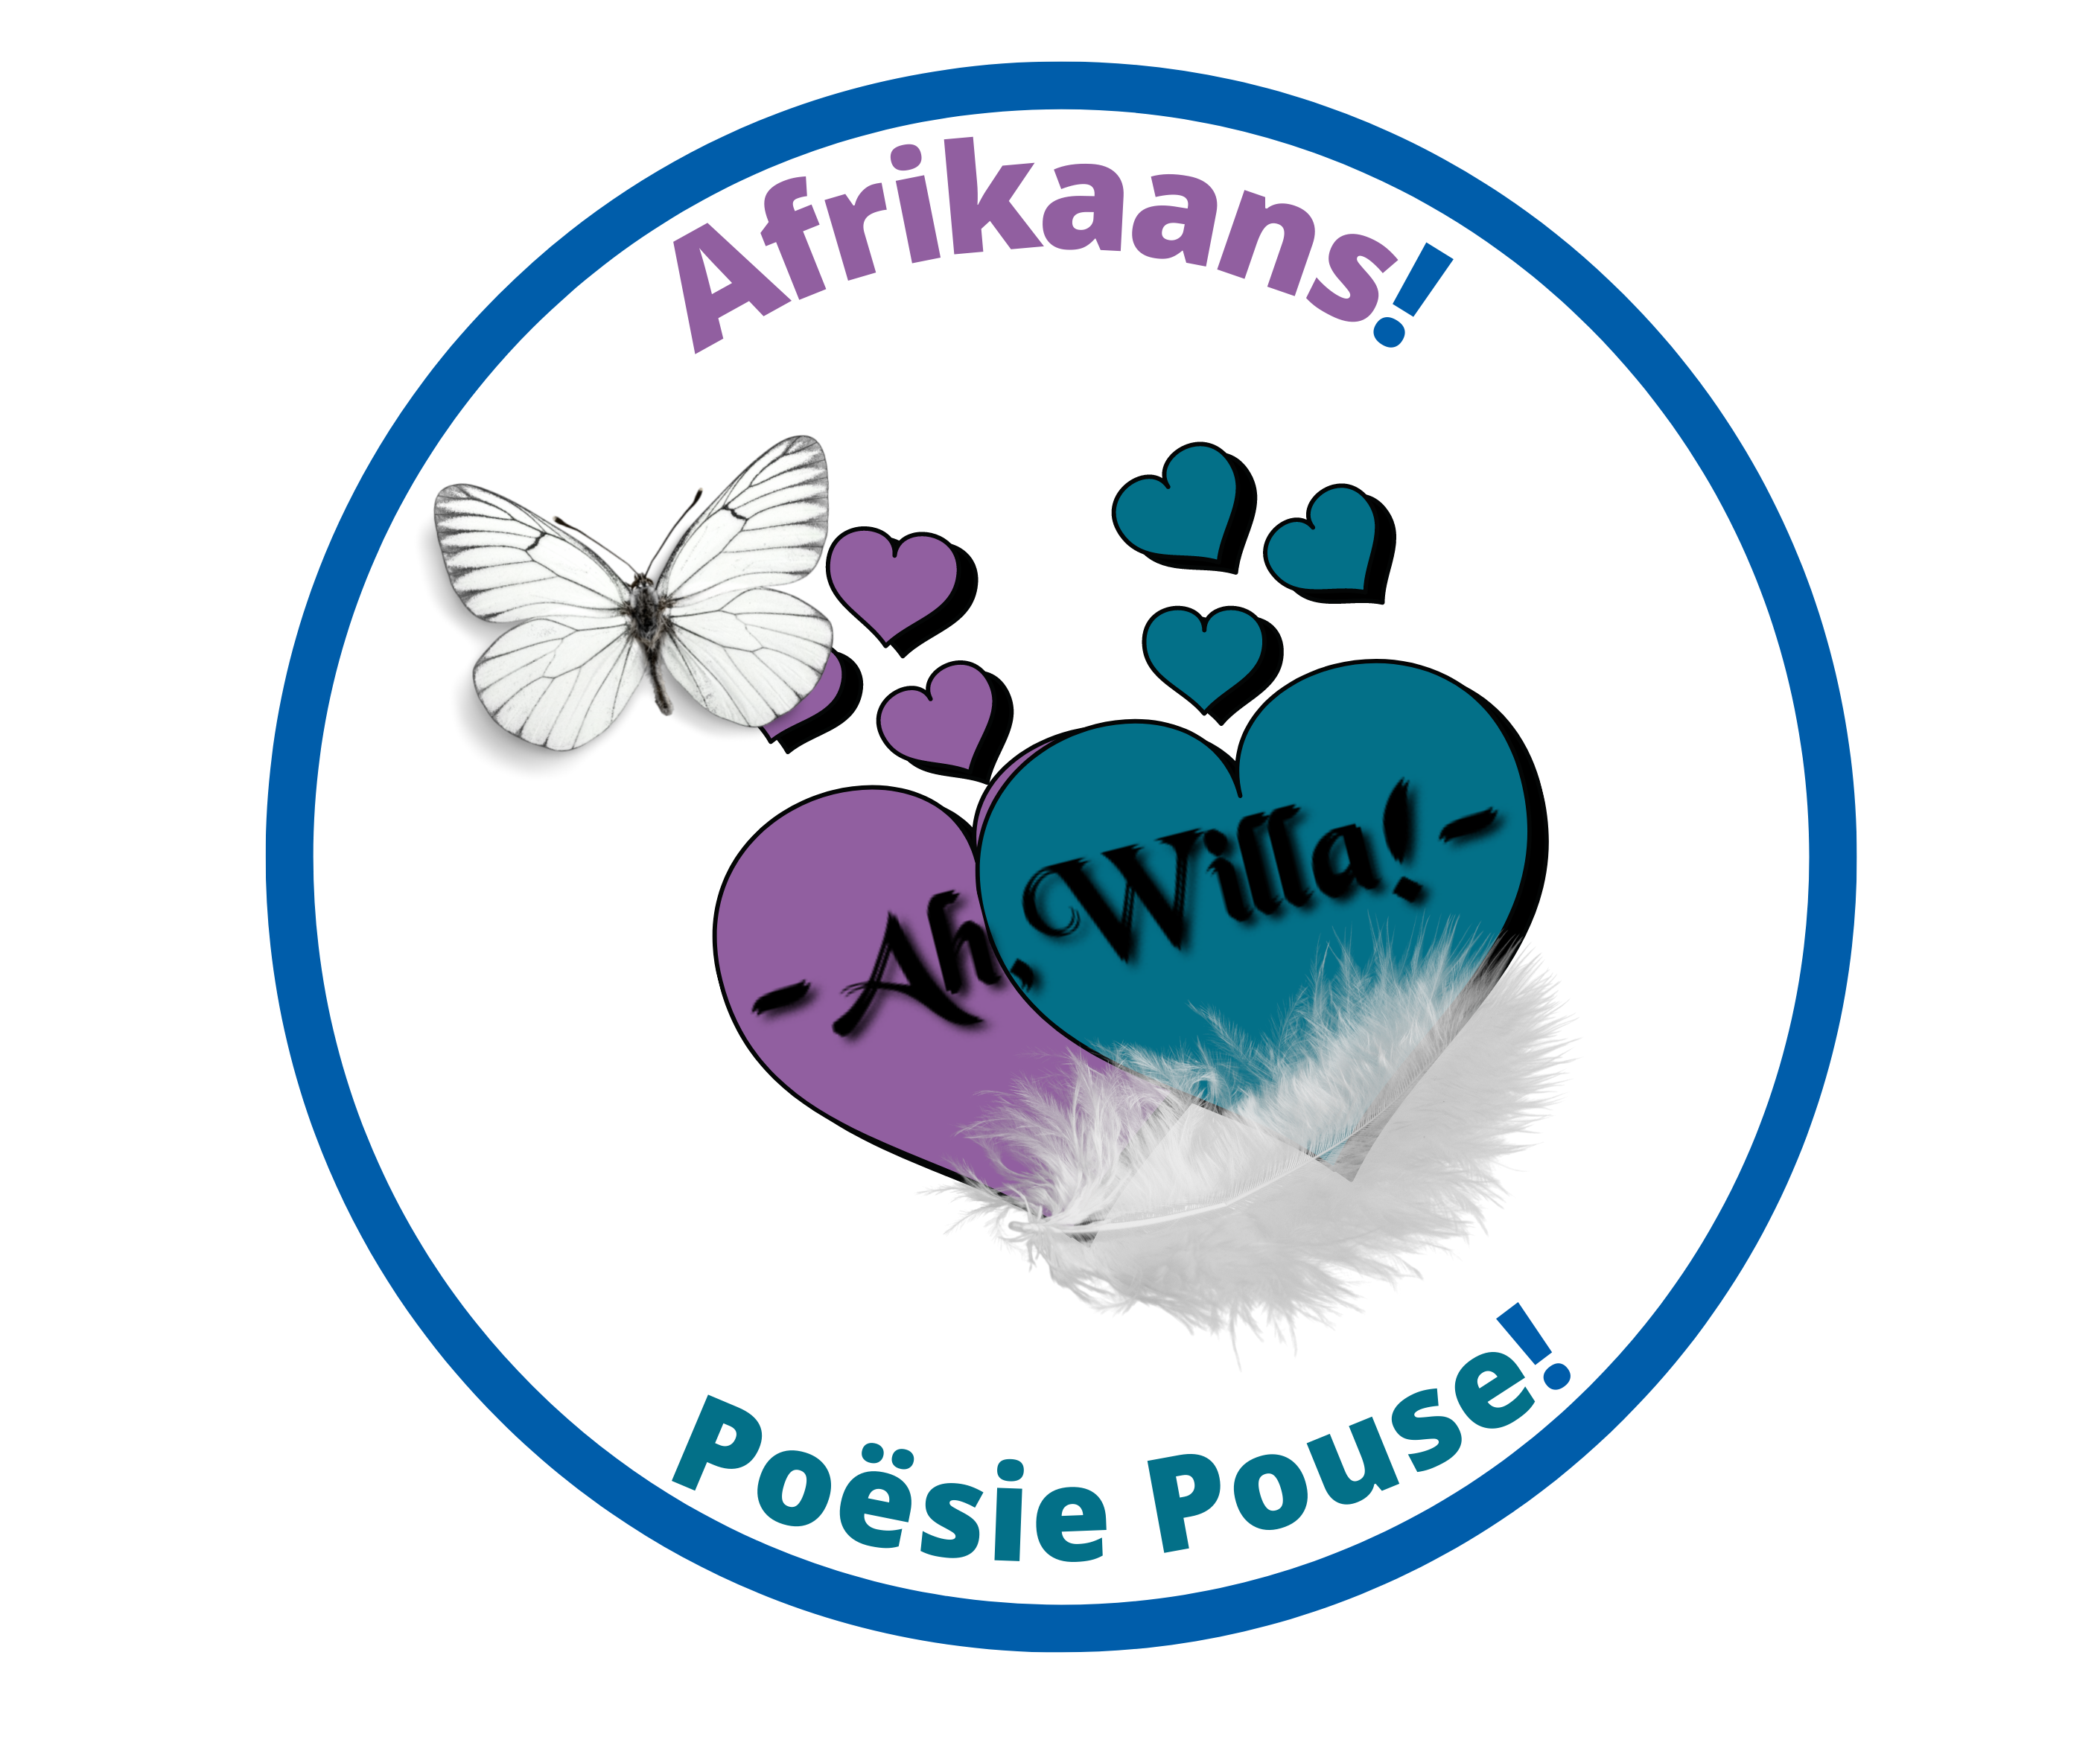 Afrikaans PP Logo Aug 2022 for Ah,Willa! © copyright